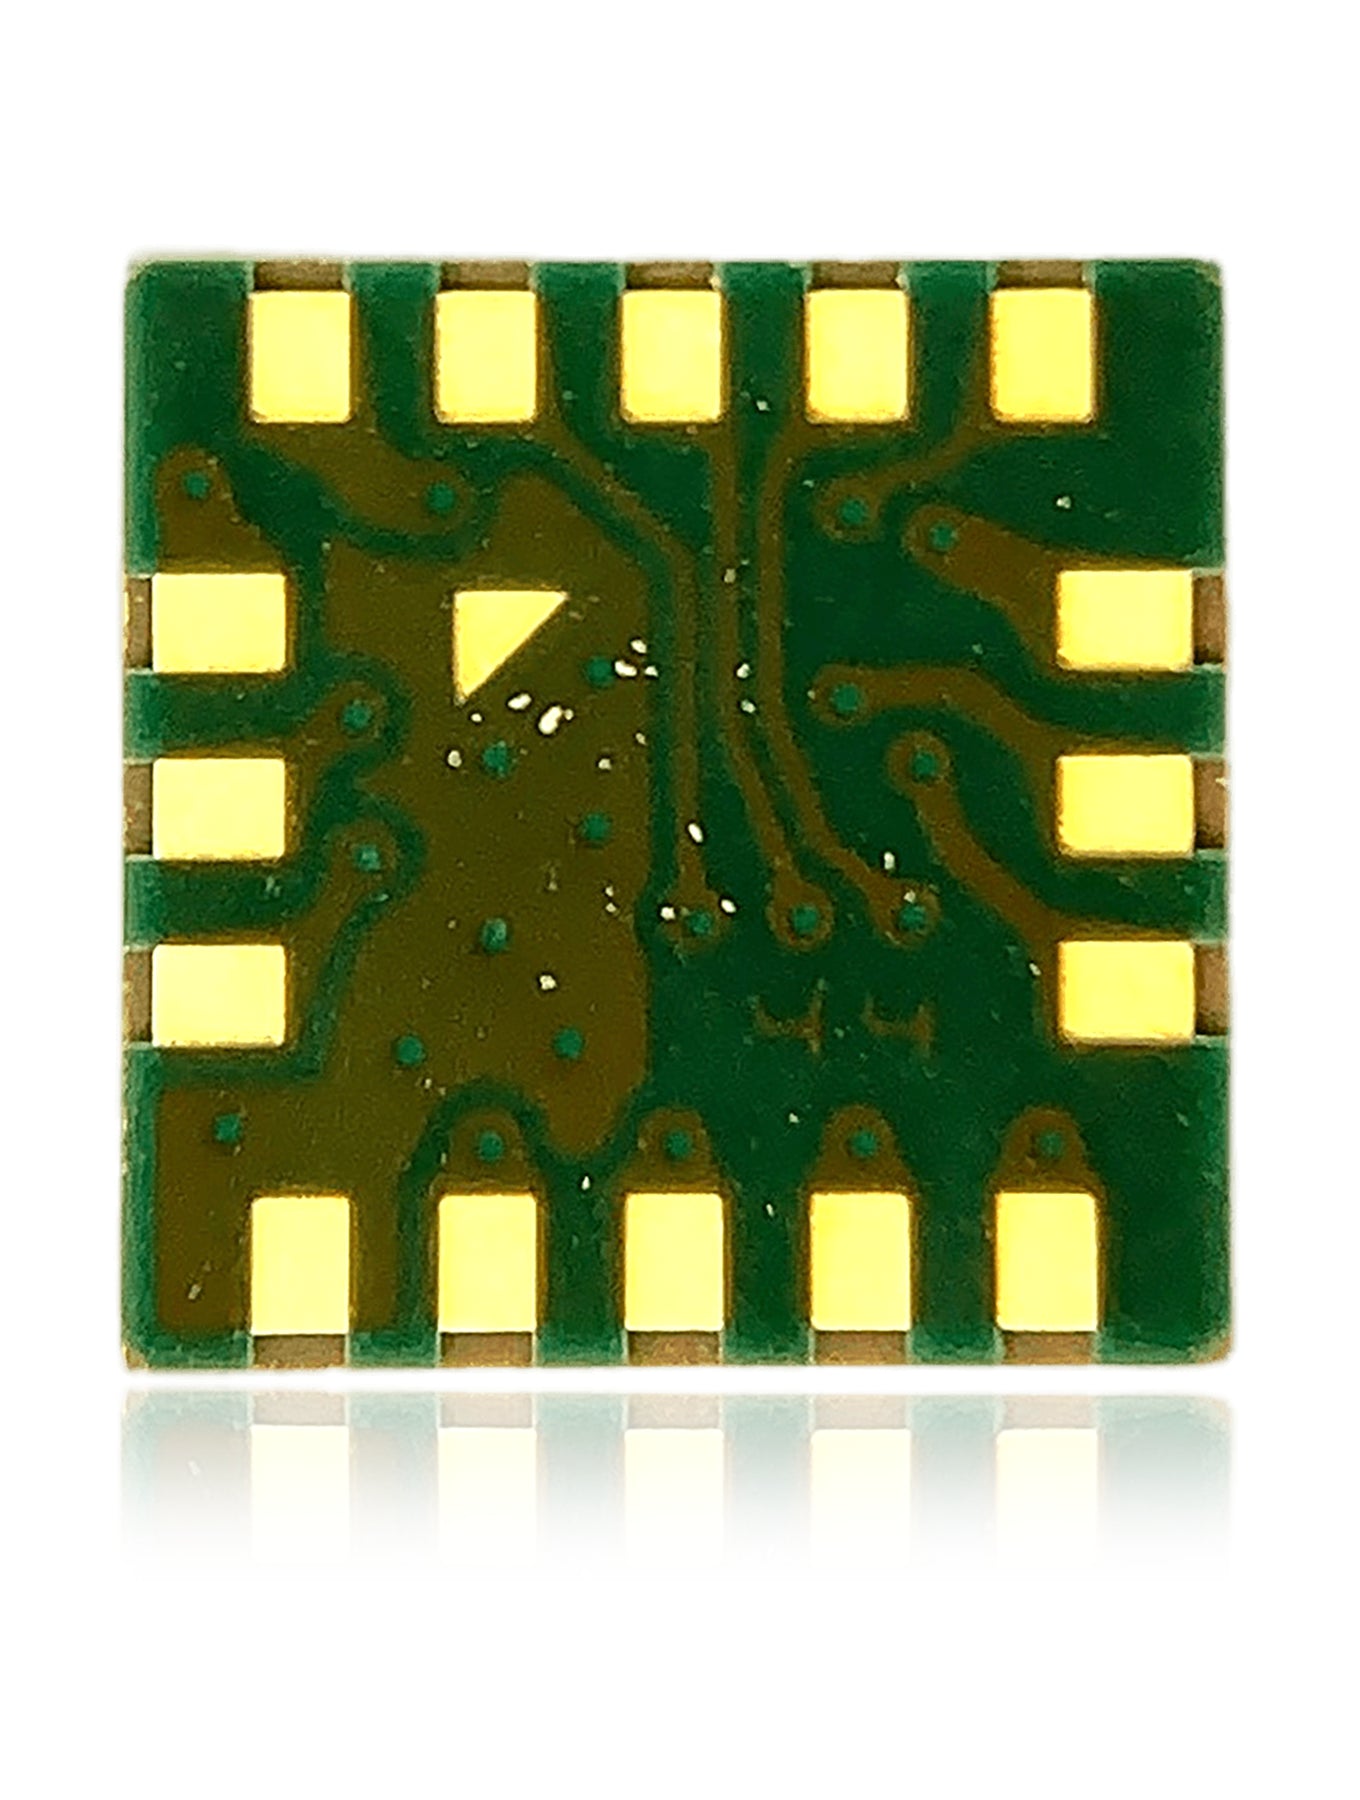 GYROSCOPE ACCELEROMETER CHIP COMPATIBLE WITH IPHONE 7 / 7 PLUS (U2404: MPU-6900: 16 PINS)